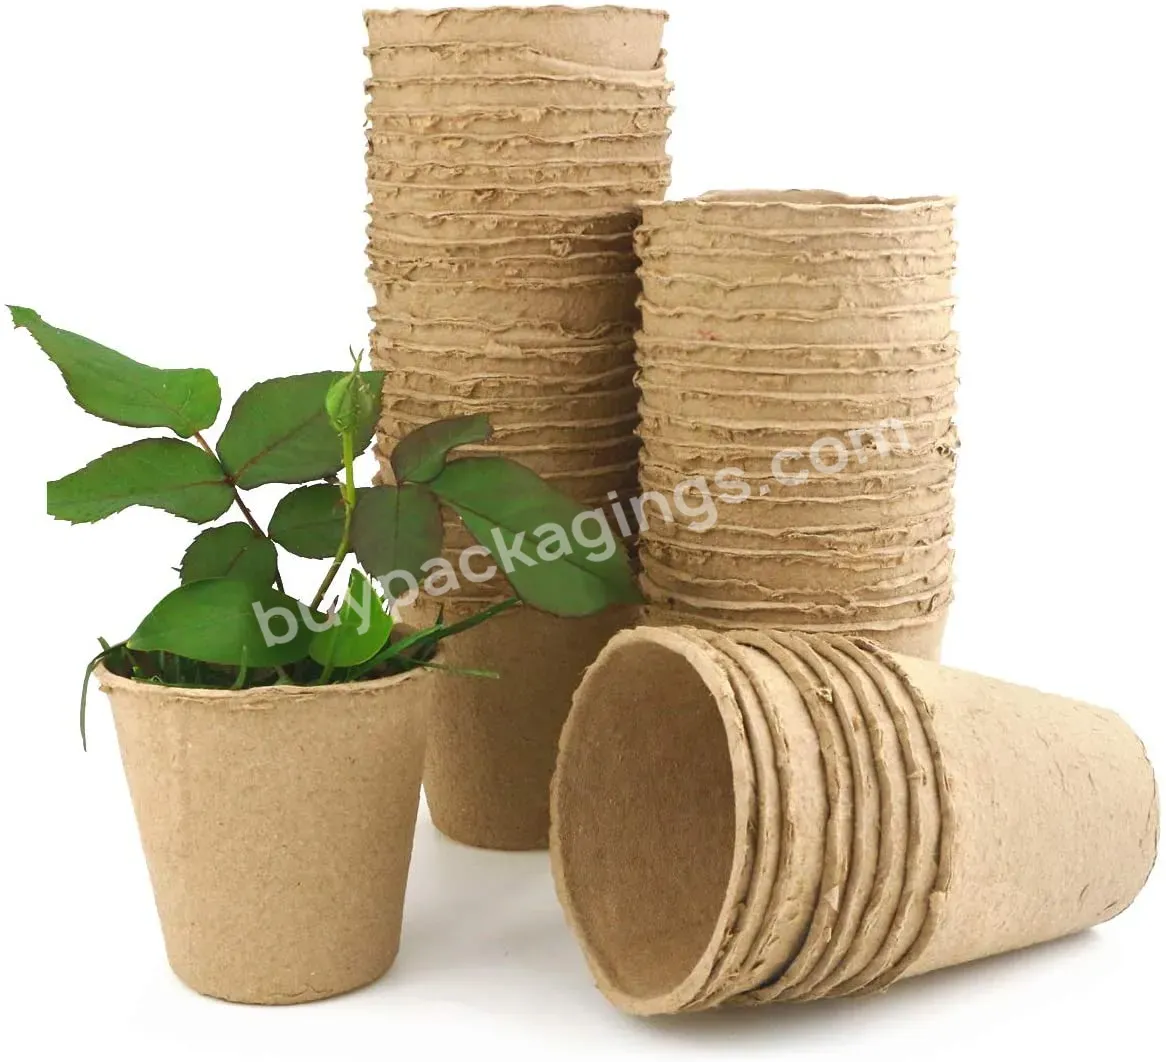 Customized Cheap Peat Pots For Seedlings Gardening Seed Starter Tray Biodegradable And Compostable Manufacturer - Buy Seed Starter Pot,Peat Pots,Seeding Pot.